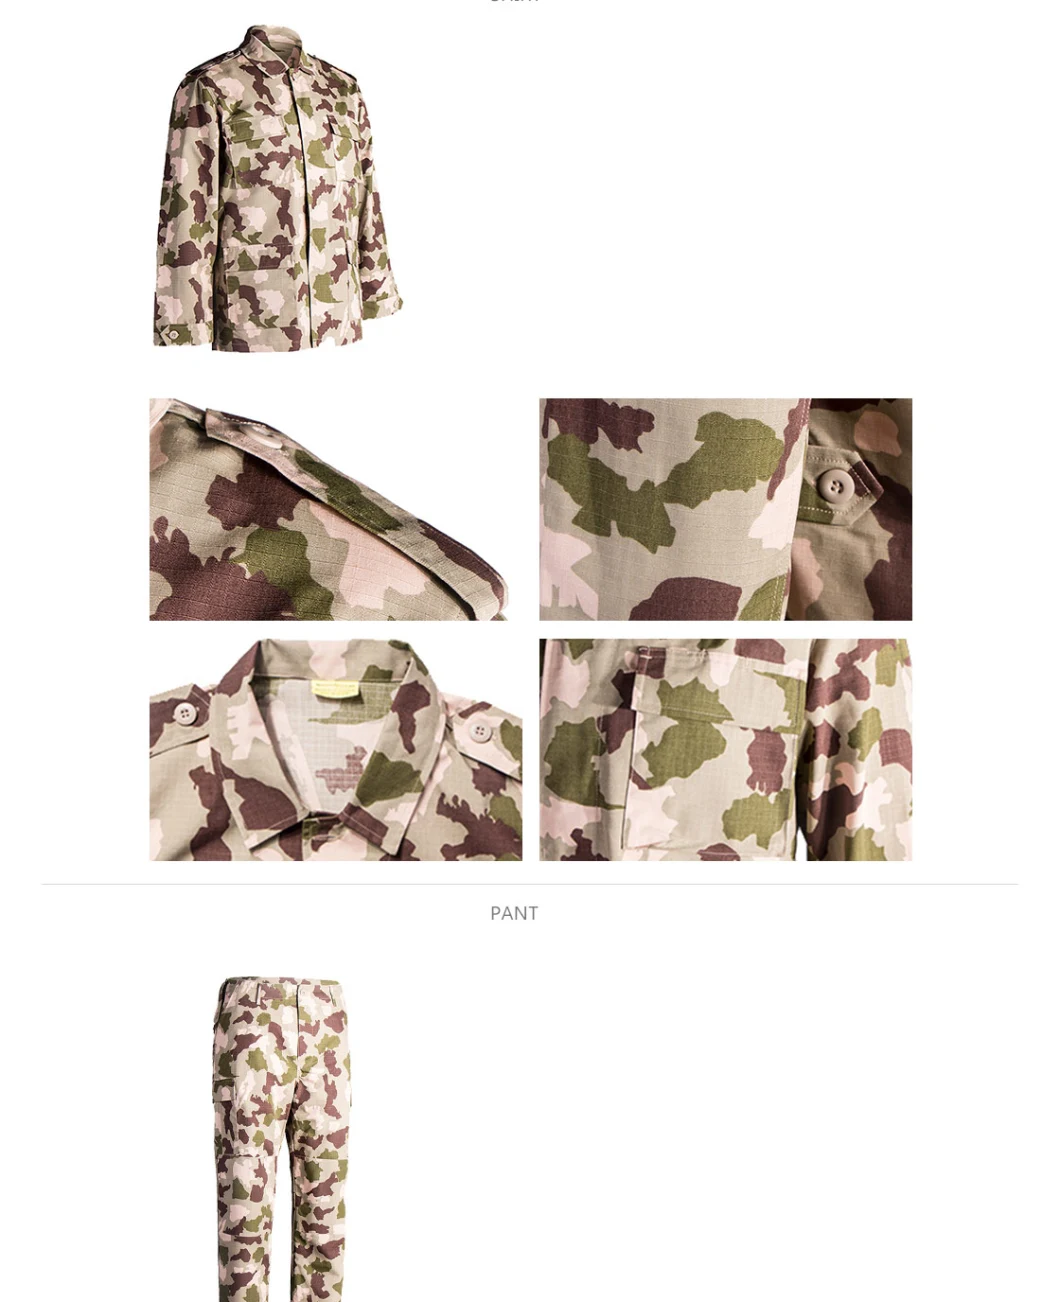 Multilateral Desert Color of Camouflage and Army Military Uniform, Army Military Clothing